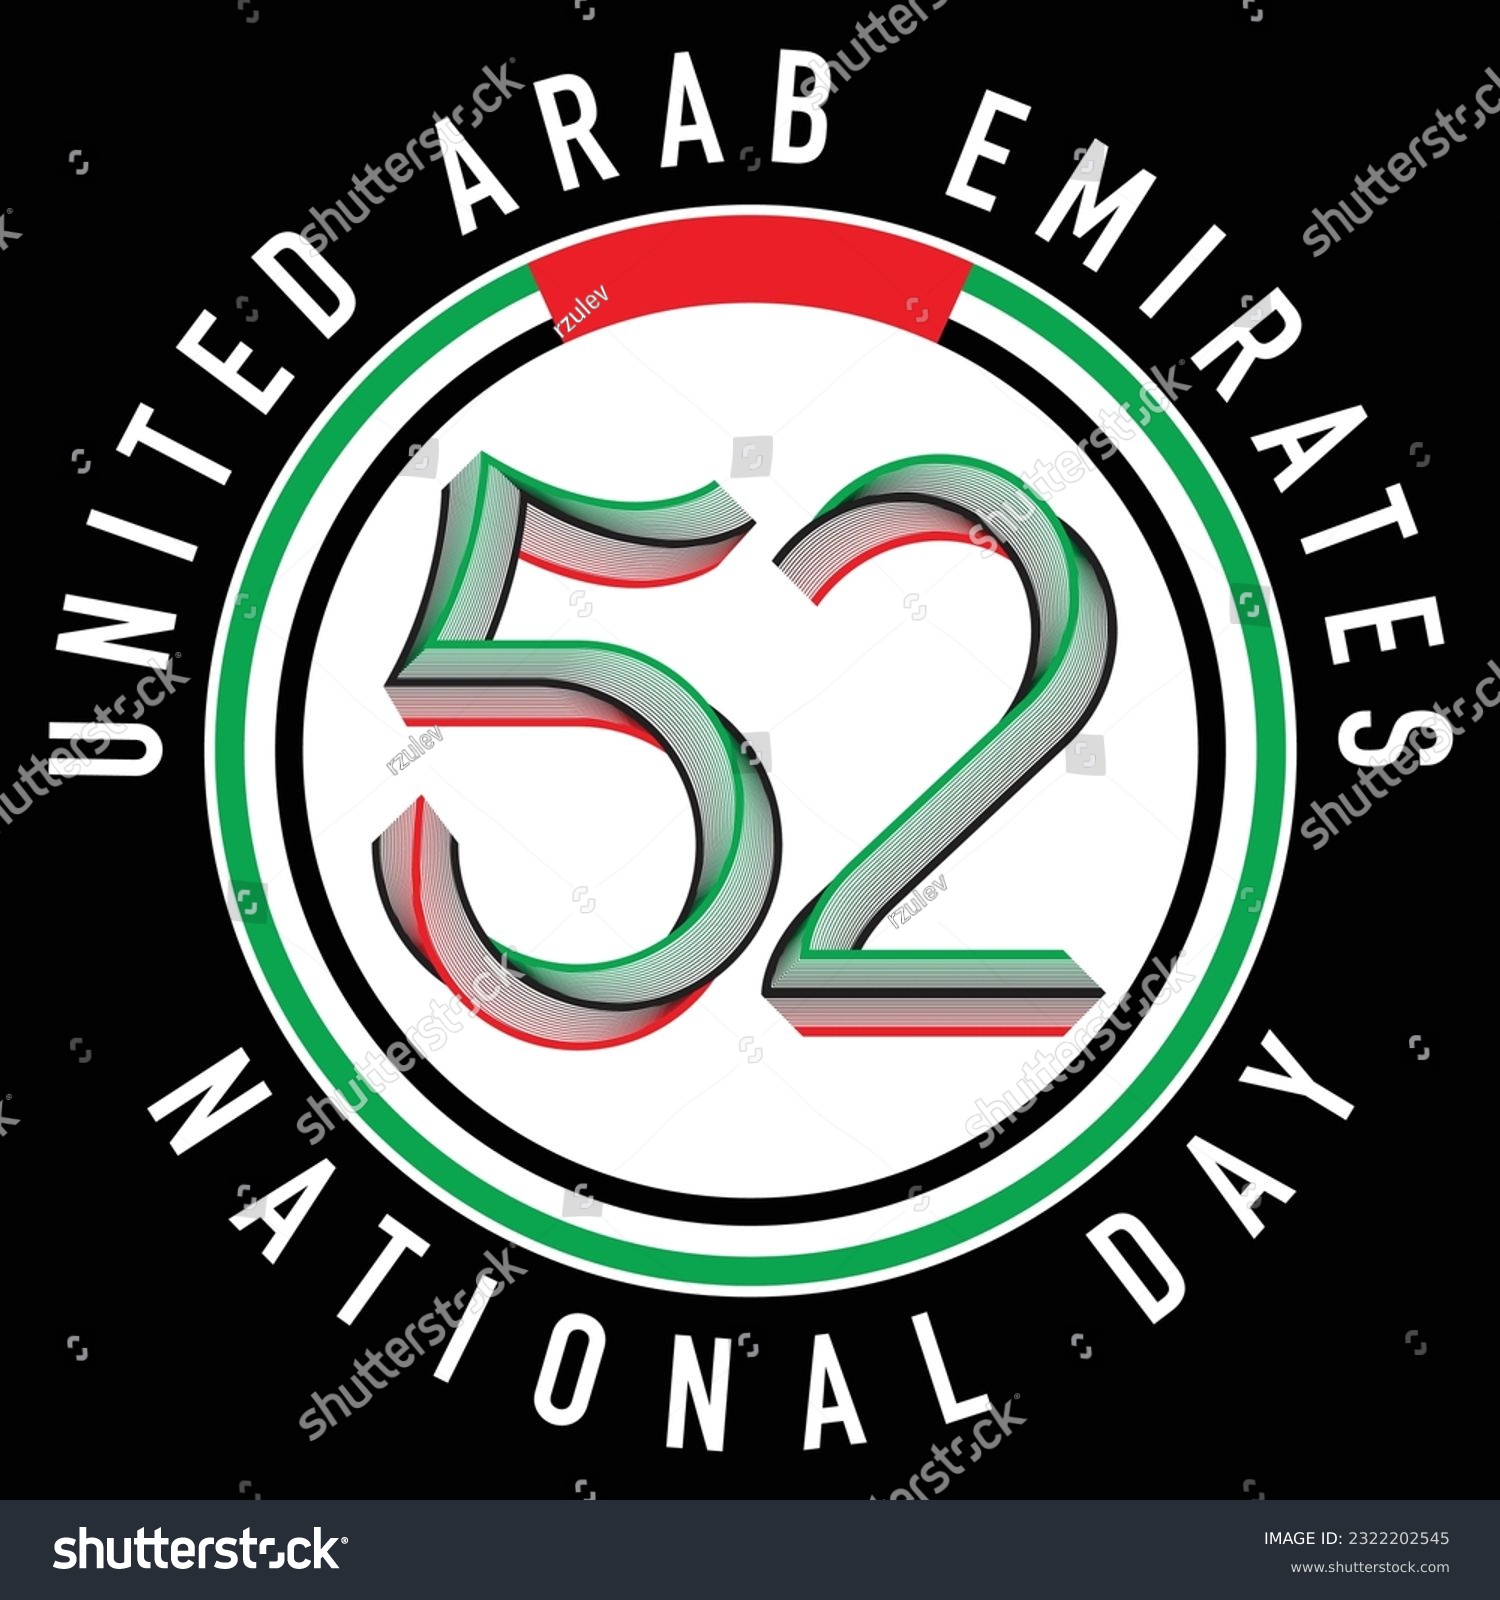 SVG of 52 years of UAE. Celebrating National Day. Illustration of UAE National Flag and colors in the shape of number 52. Spirit of the Union. SVG file. svg